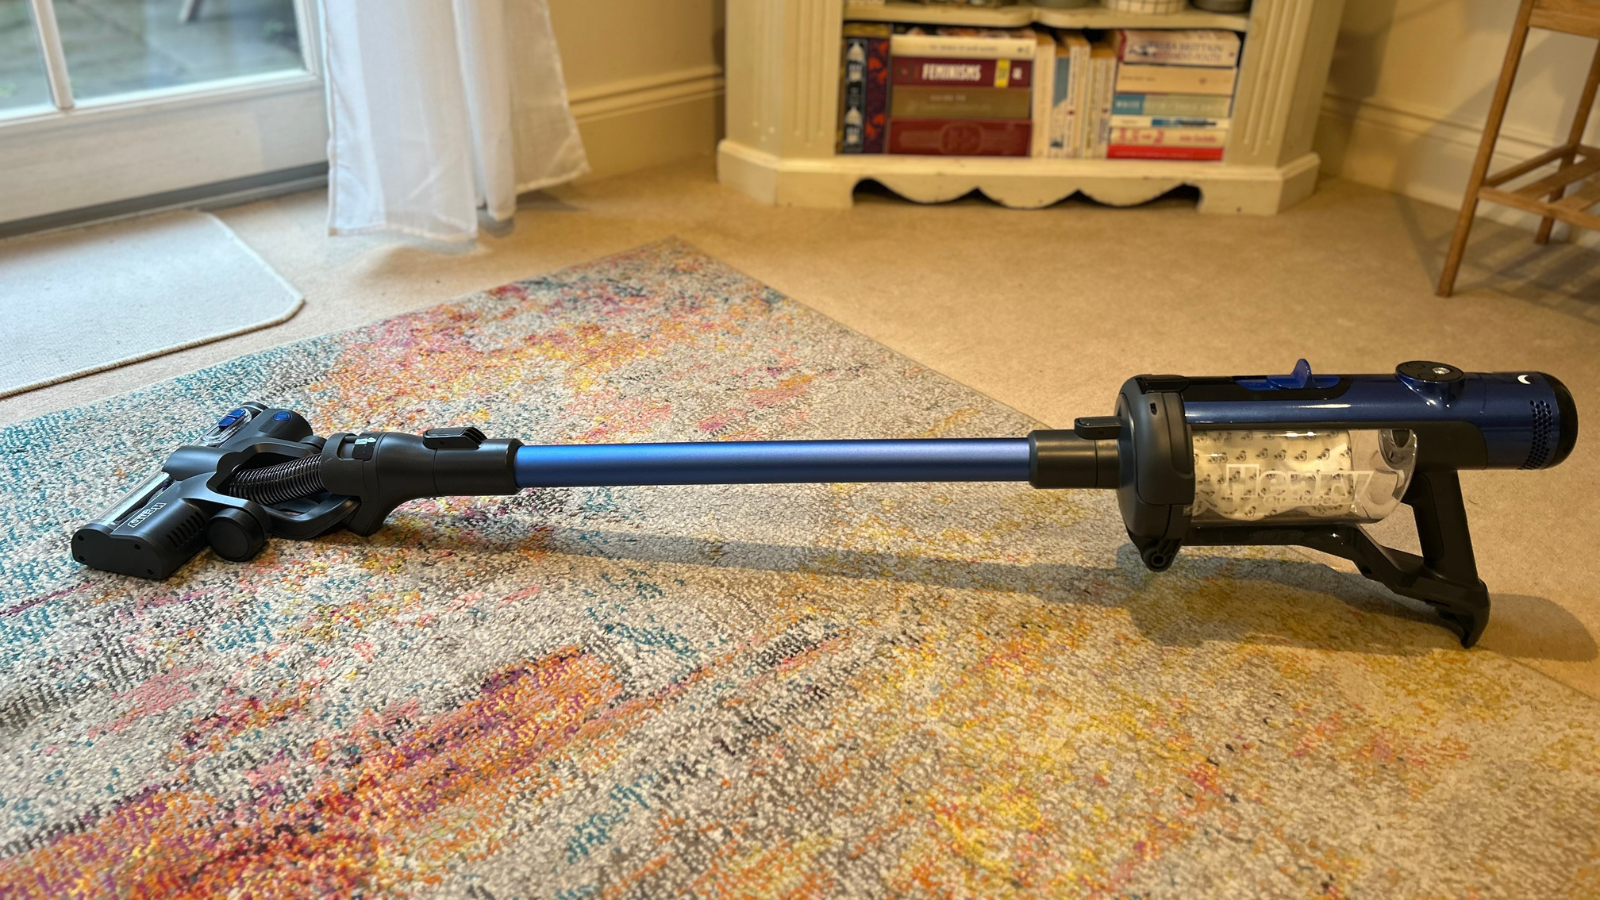 Unboxing the Proscenic P11 Mopping Cordless Vacuum and Setup! 